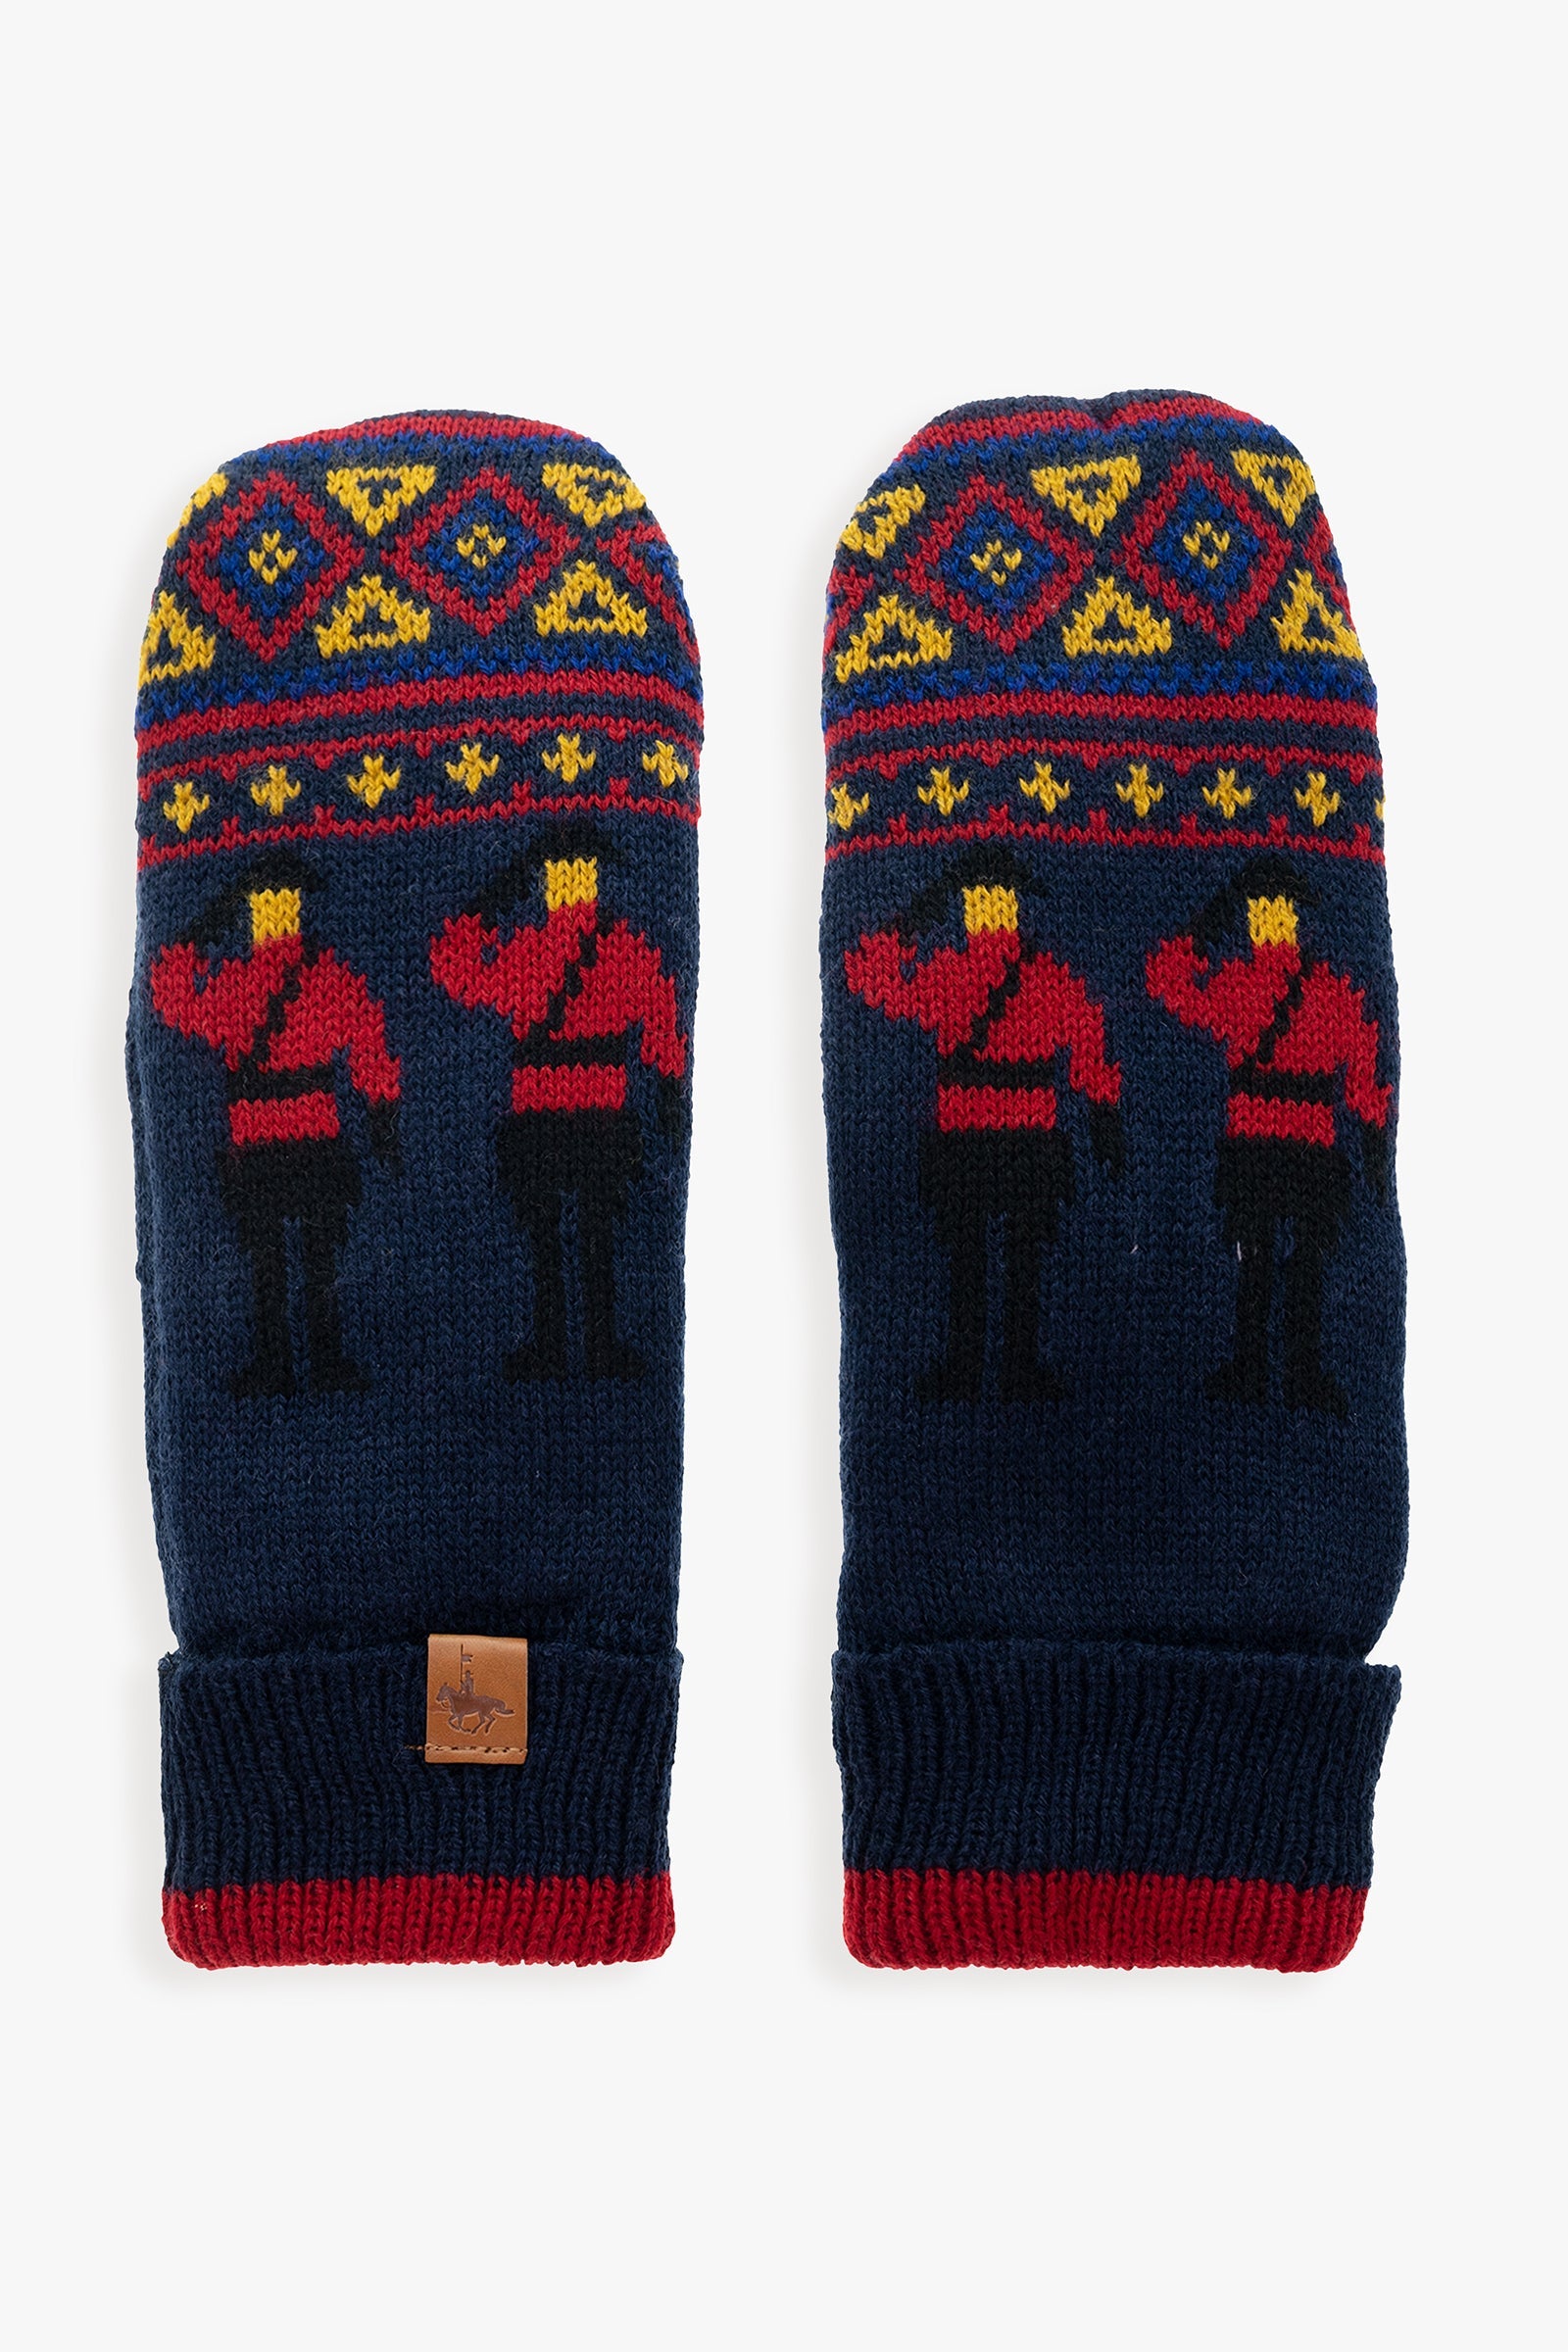 RCMP Royal Canadian Mounted Police Ladies Thermal Winter Mittens